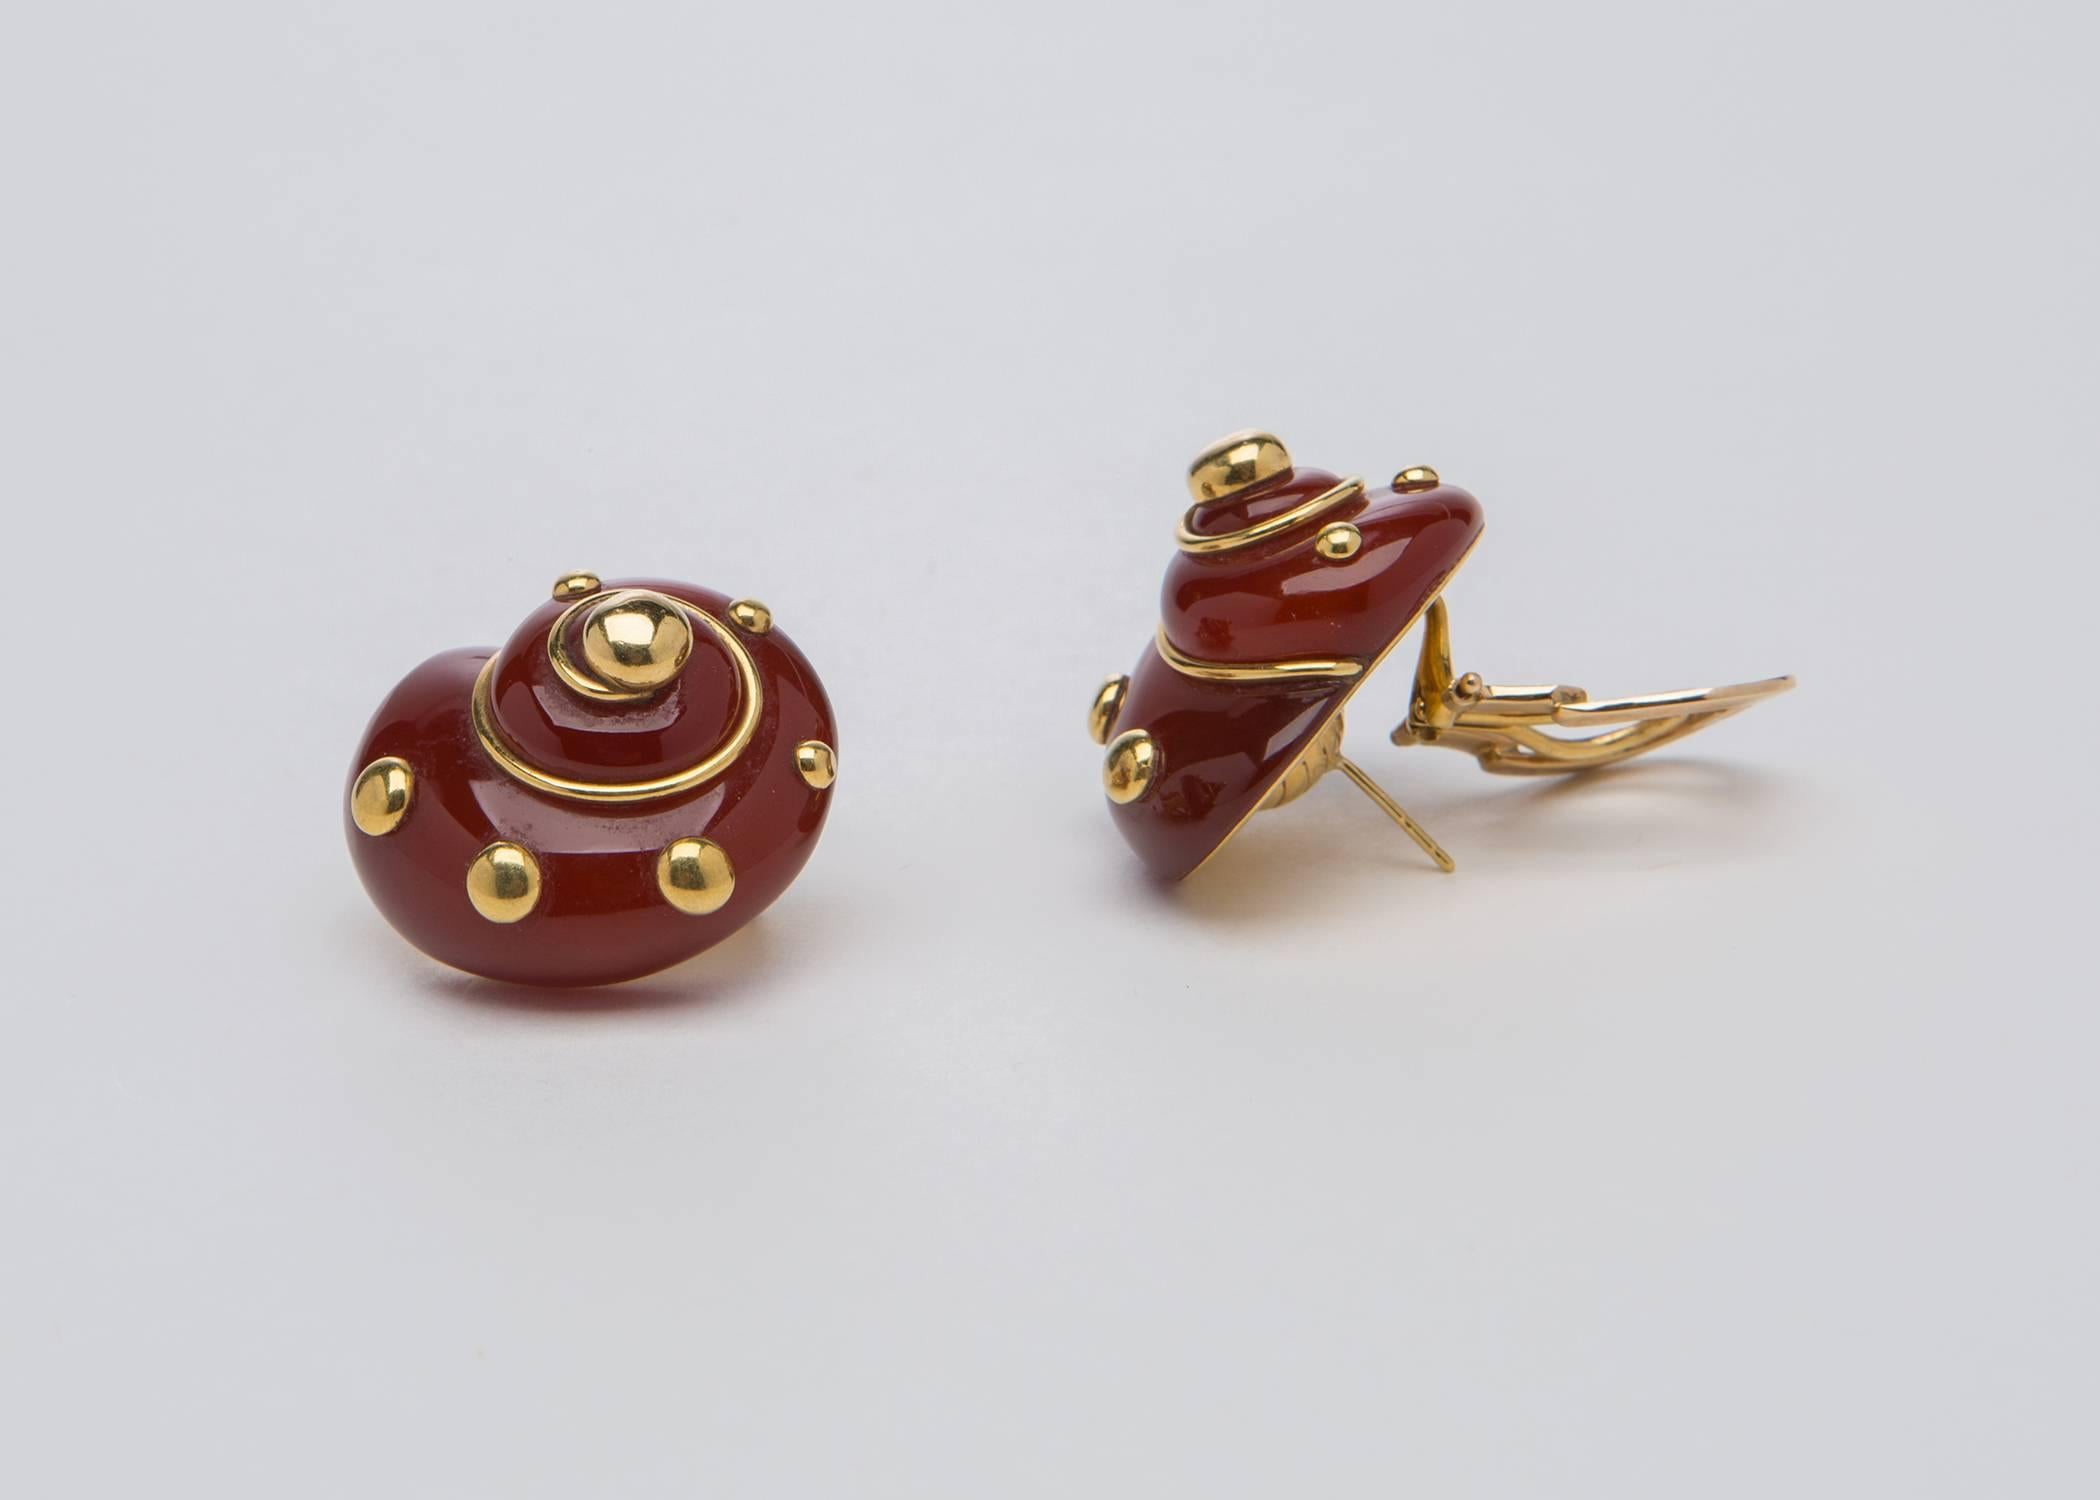 Absolutely one of Verdura's most iconic and sought after designs. Rich and saturated Carnelian is carved into a soft shell shape and finished with gold wire and ball detailing. A wearable and flattering shape. approximately 1 1/4 by 1 inch in size